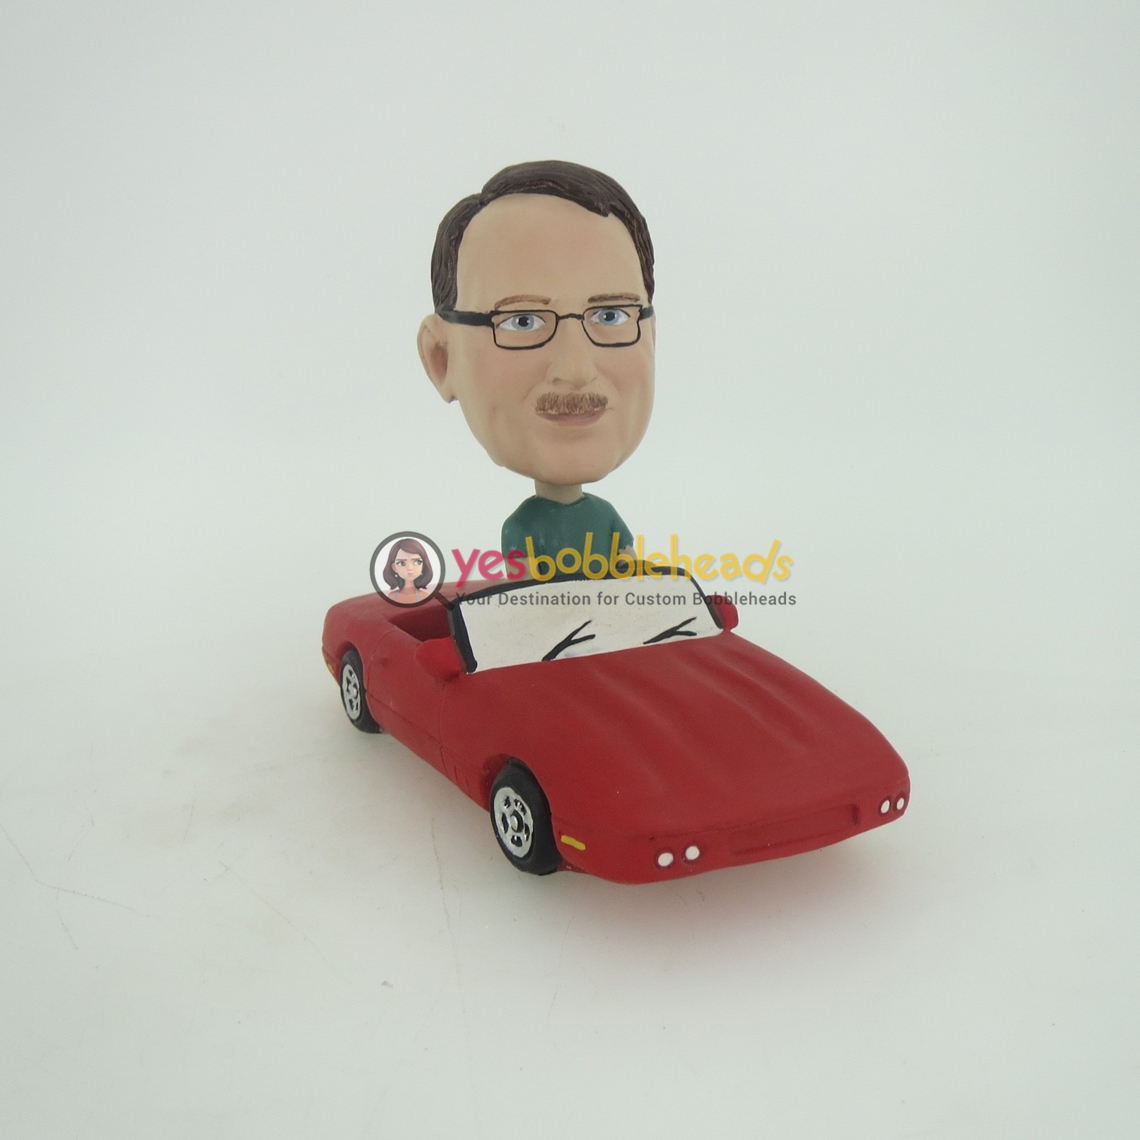 Picture of Custom Bobblehead Doll: Man Driving In Red Car